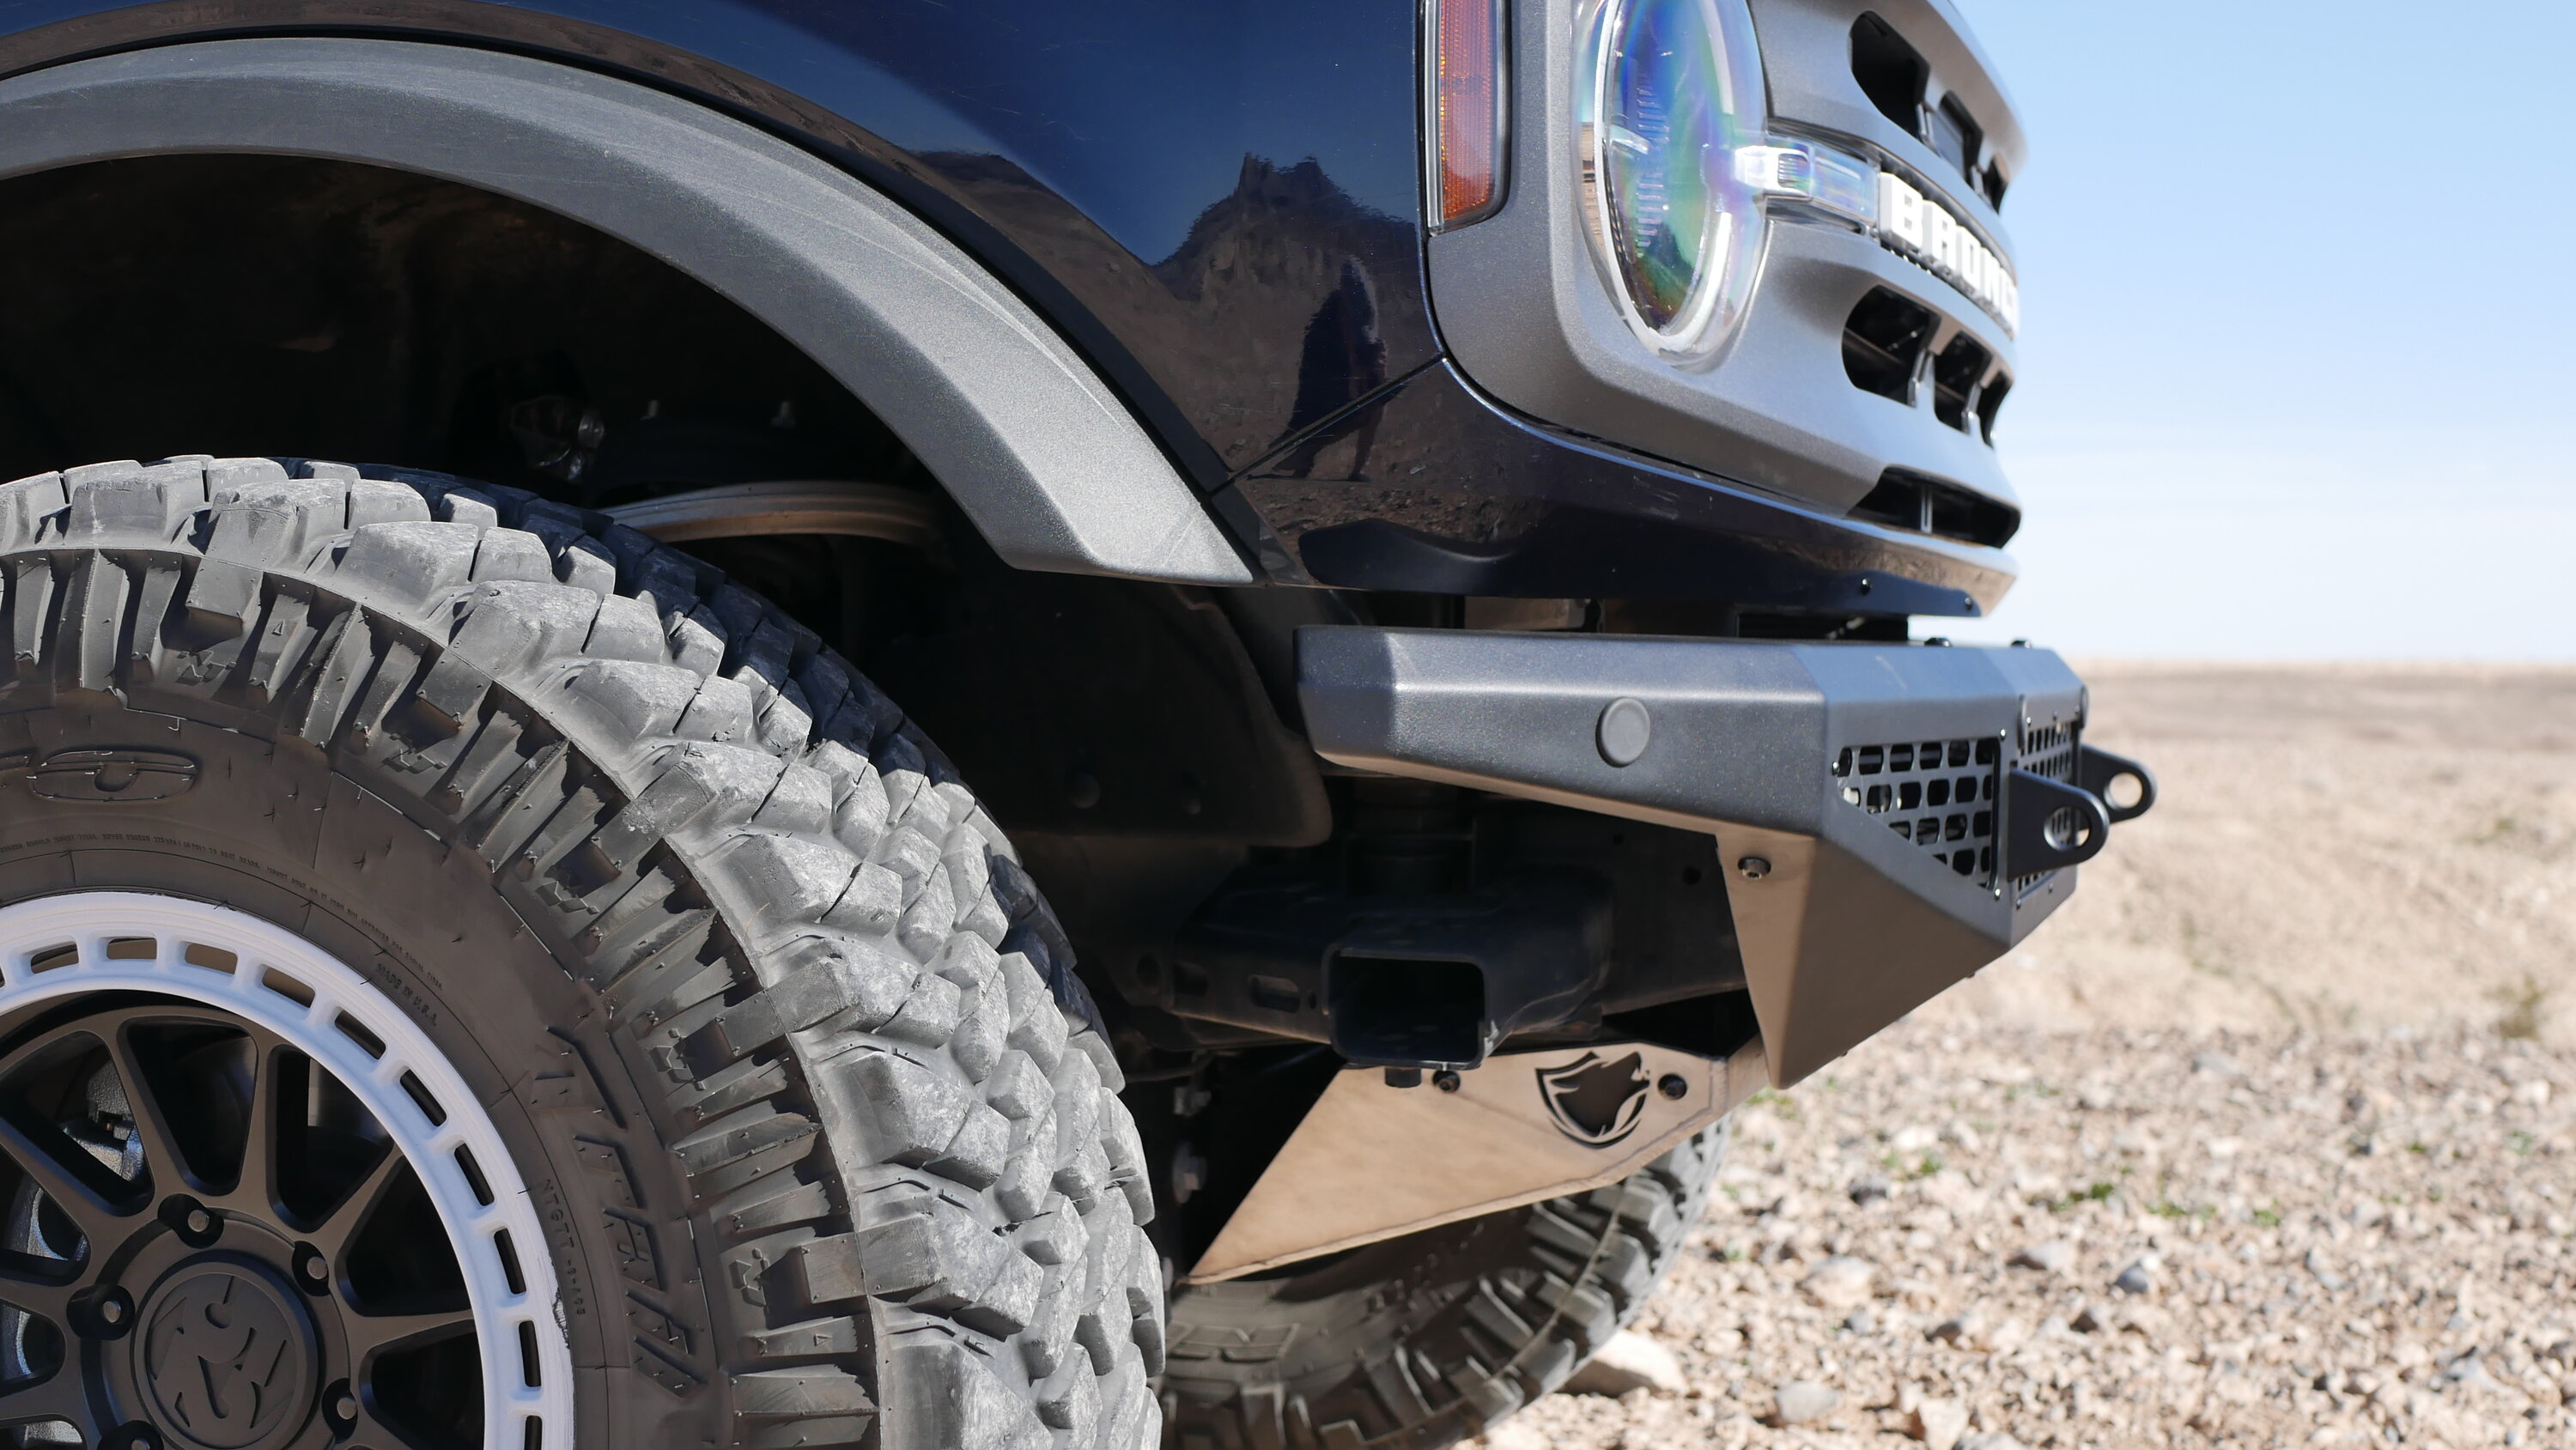 Ford Bronco A Lightweight Steel Front Bumper? - LOBO Off-Road Front Bumper: Installed Photos & Review P1050034.JPG